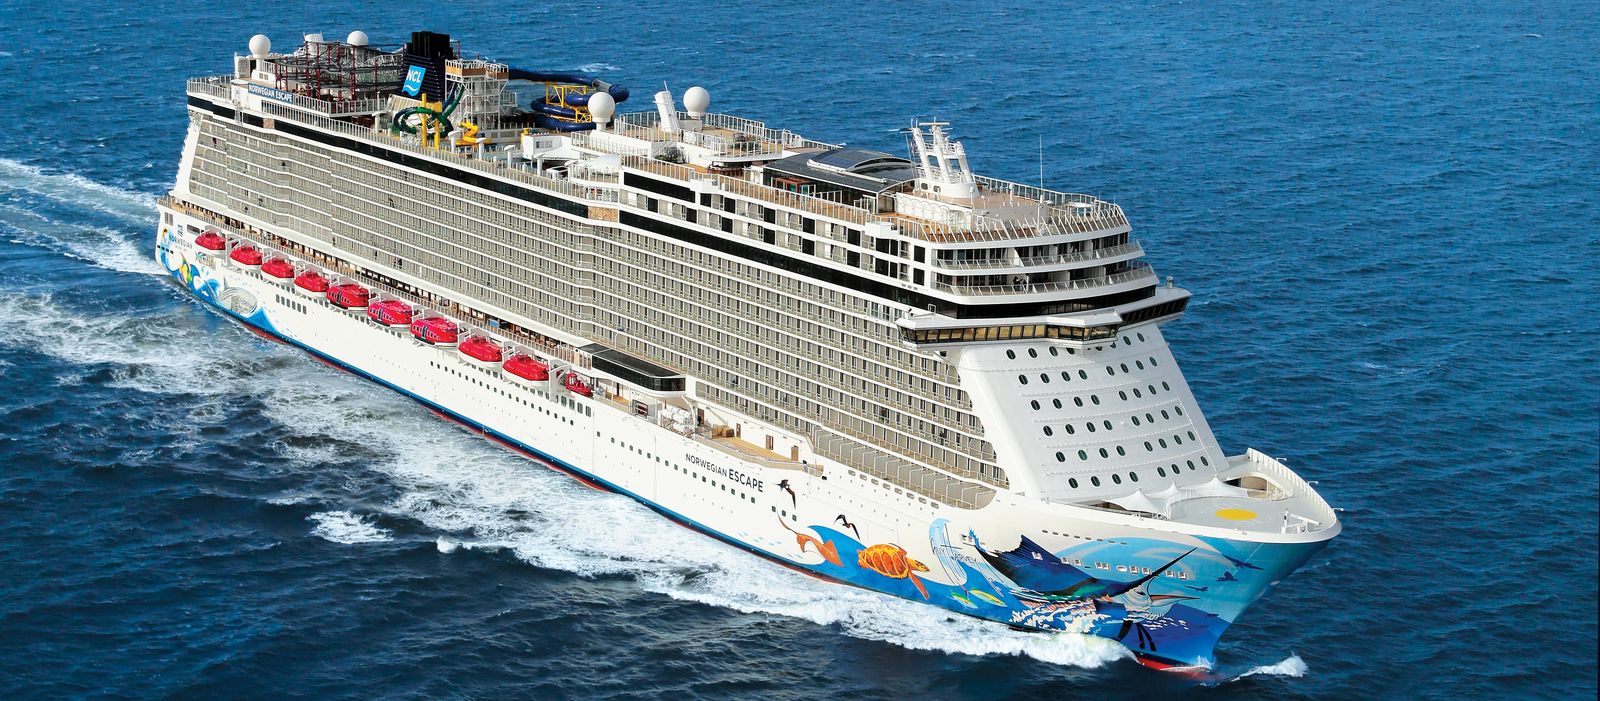 Norwegian Escape during Sea Trials along the coast of Norway